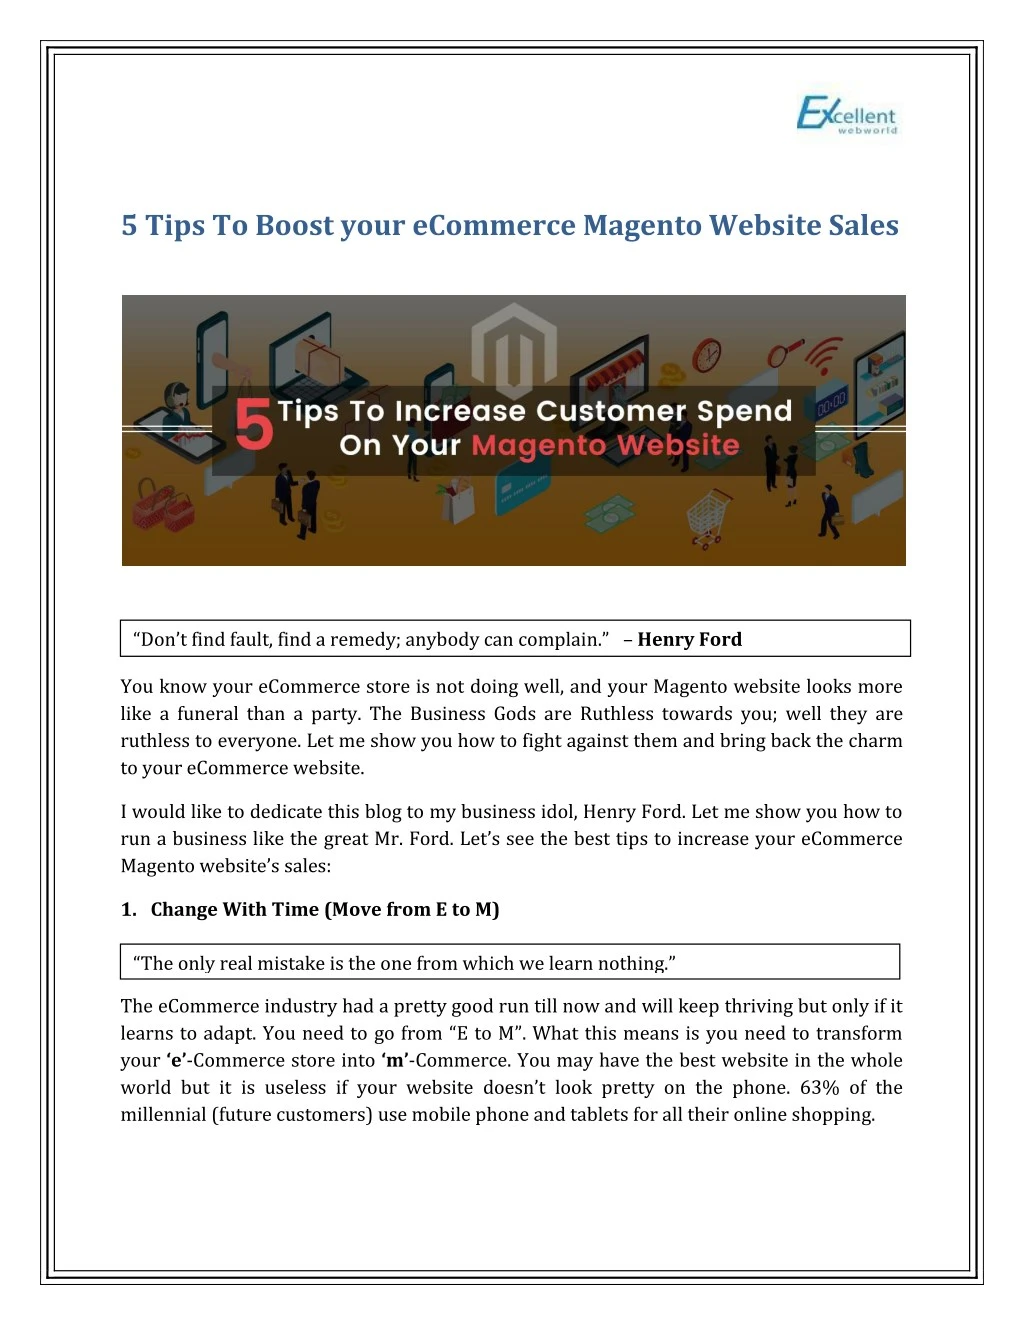 5 tips to boost your ecommerce magento website